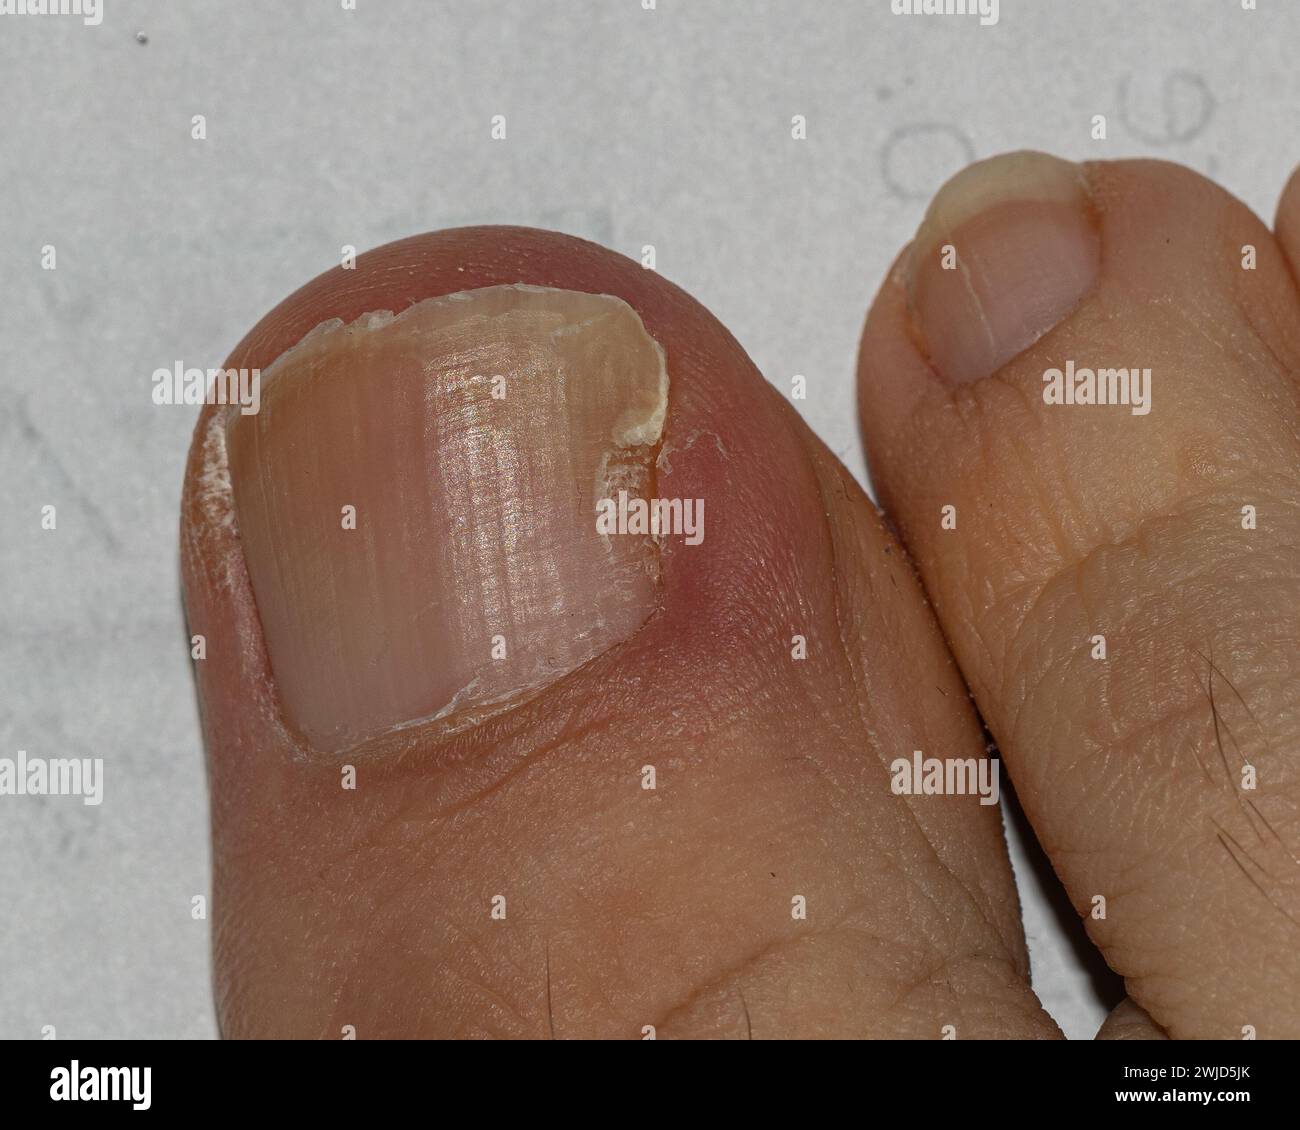 Close-up view of toes showing detailed texture and healthy nails Stock Photo